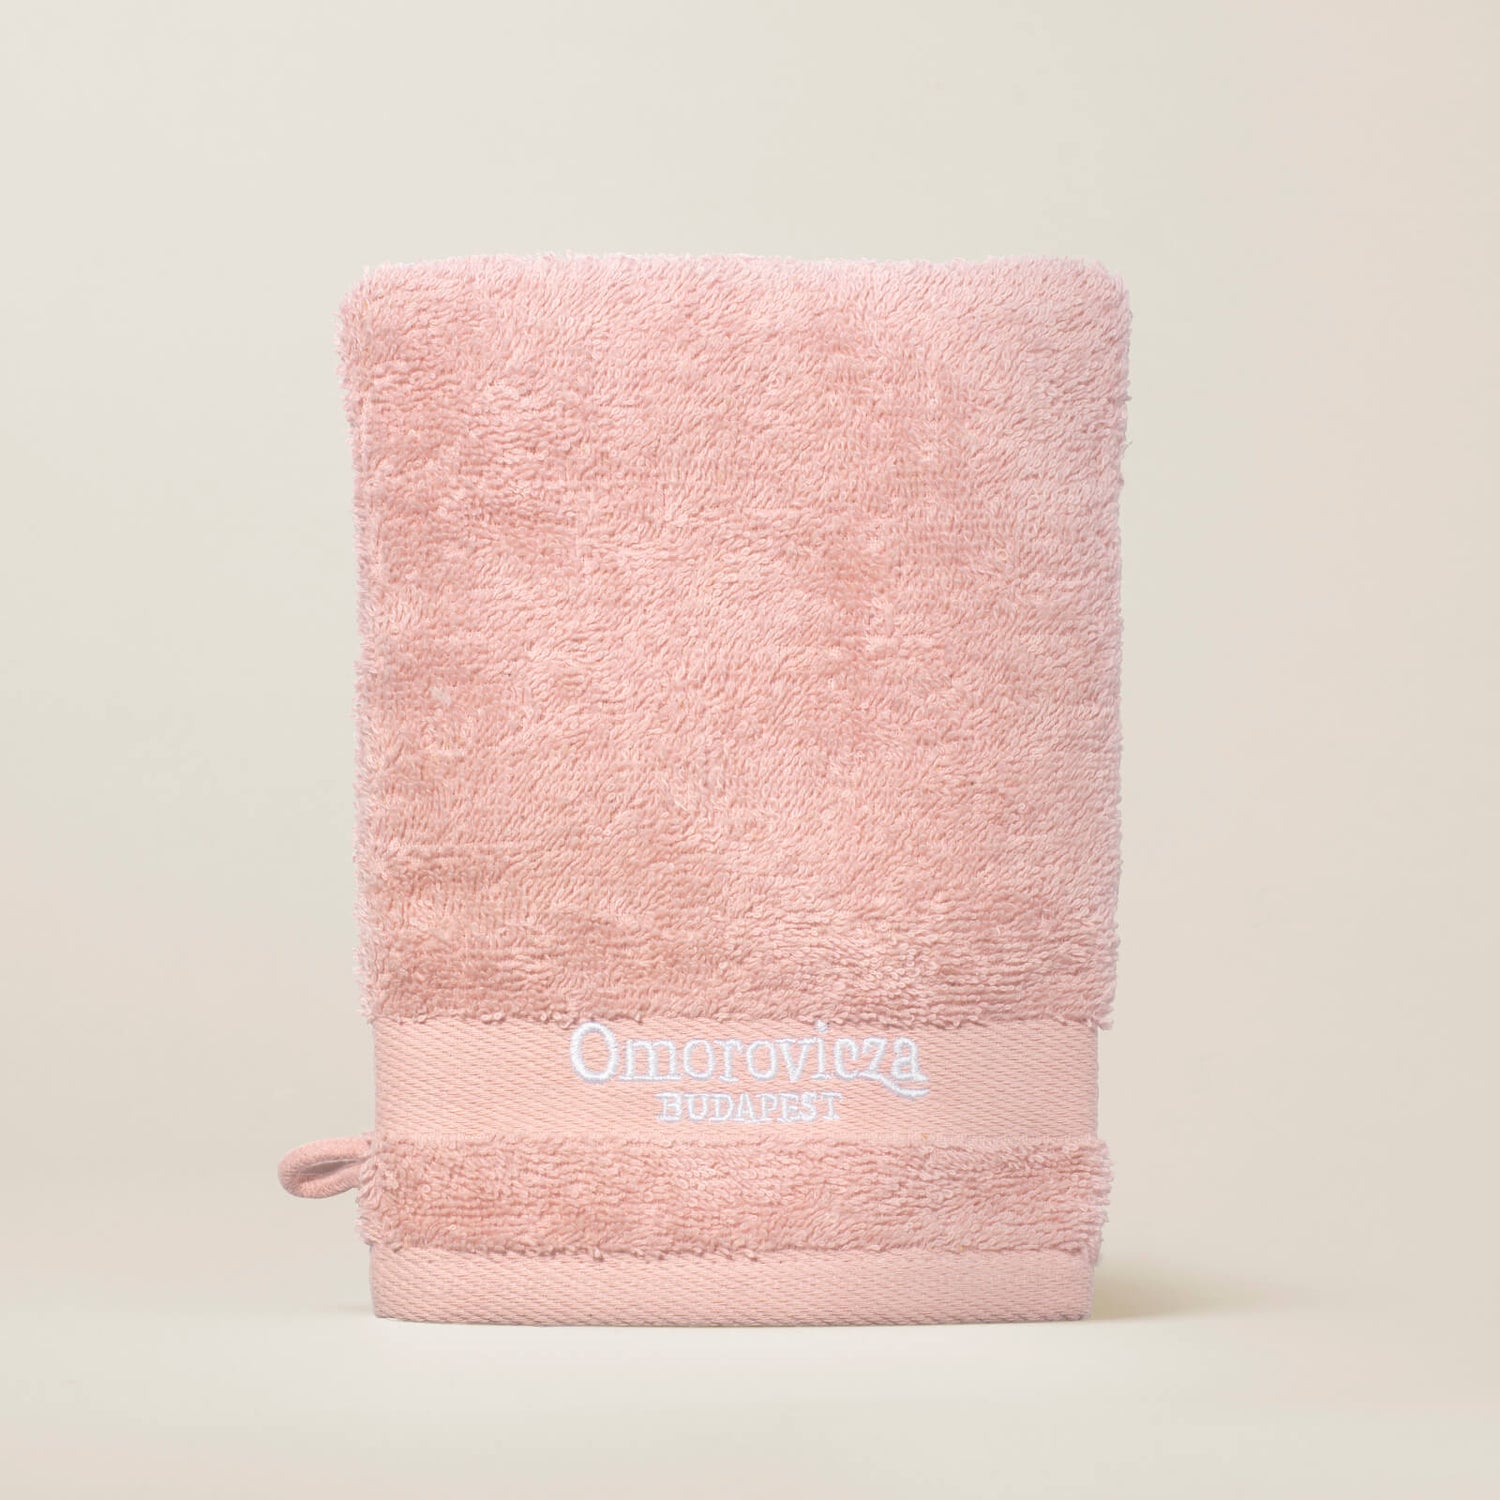 Limited Edition Pink Cleansing Mitt